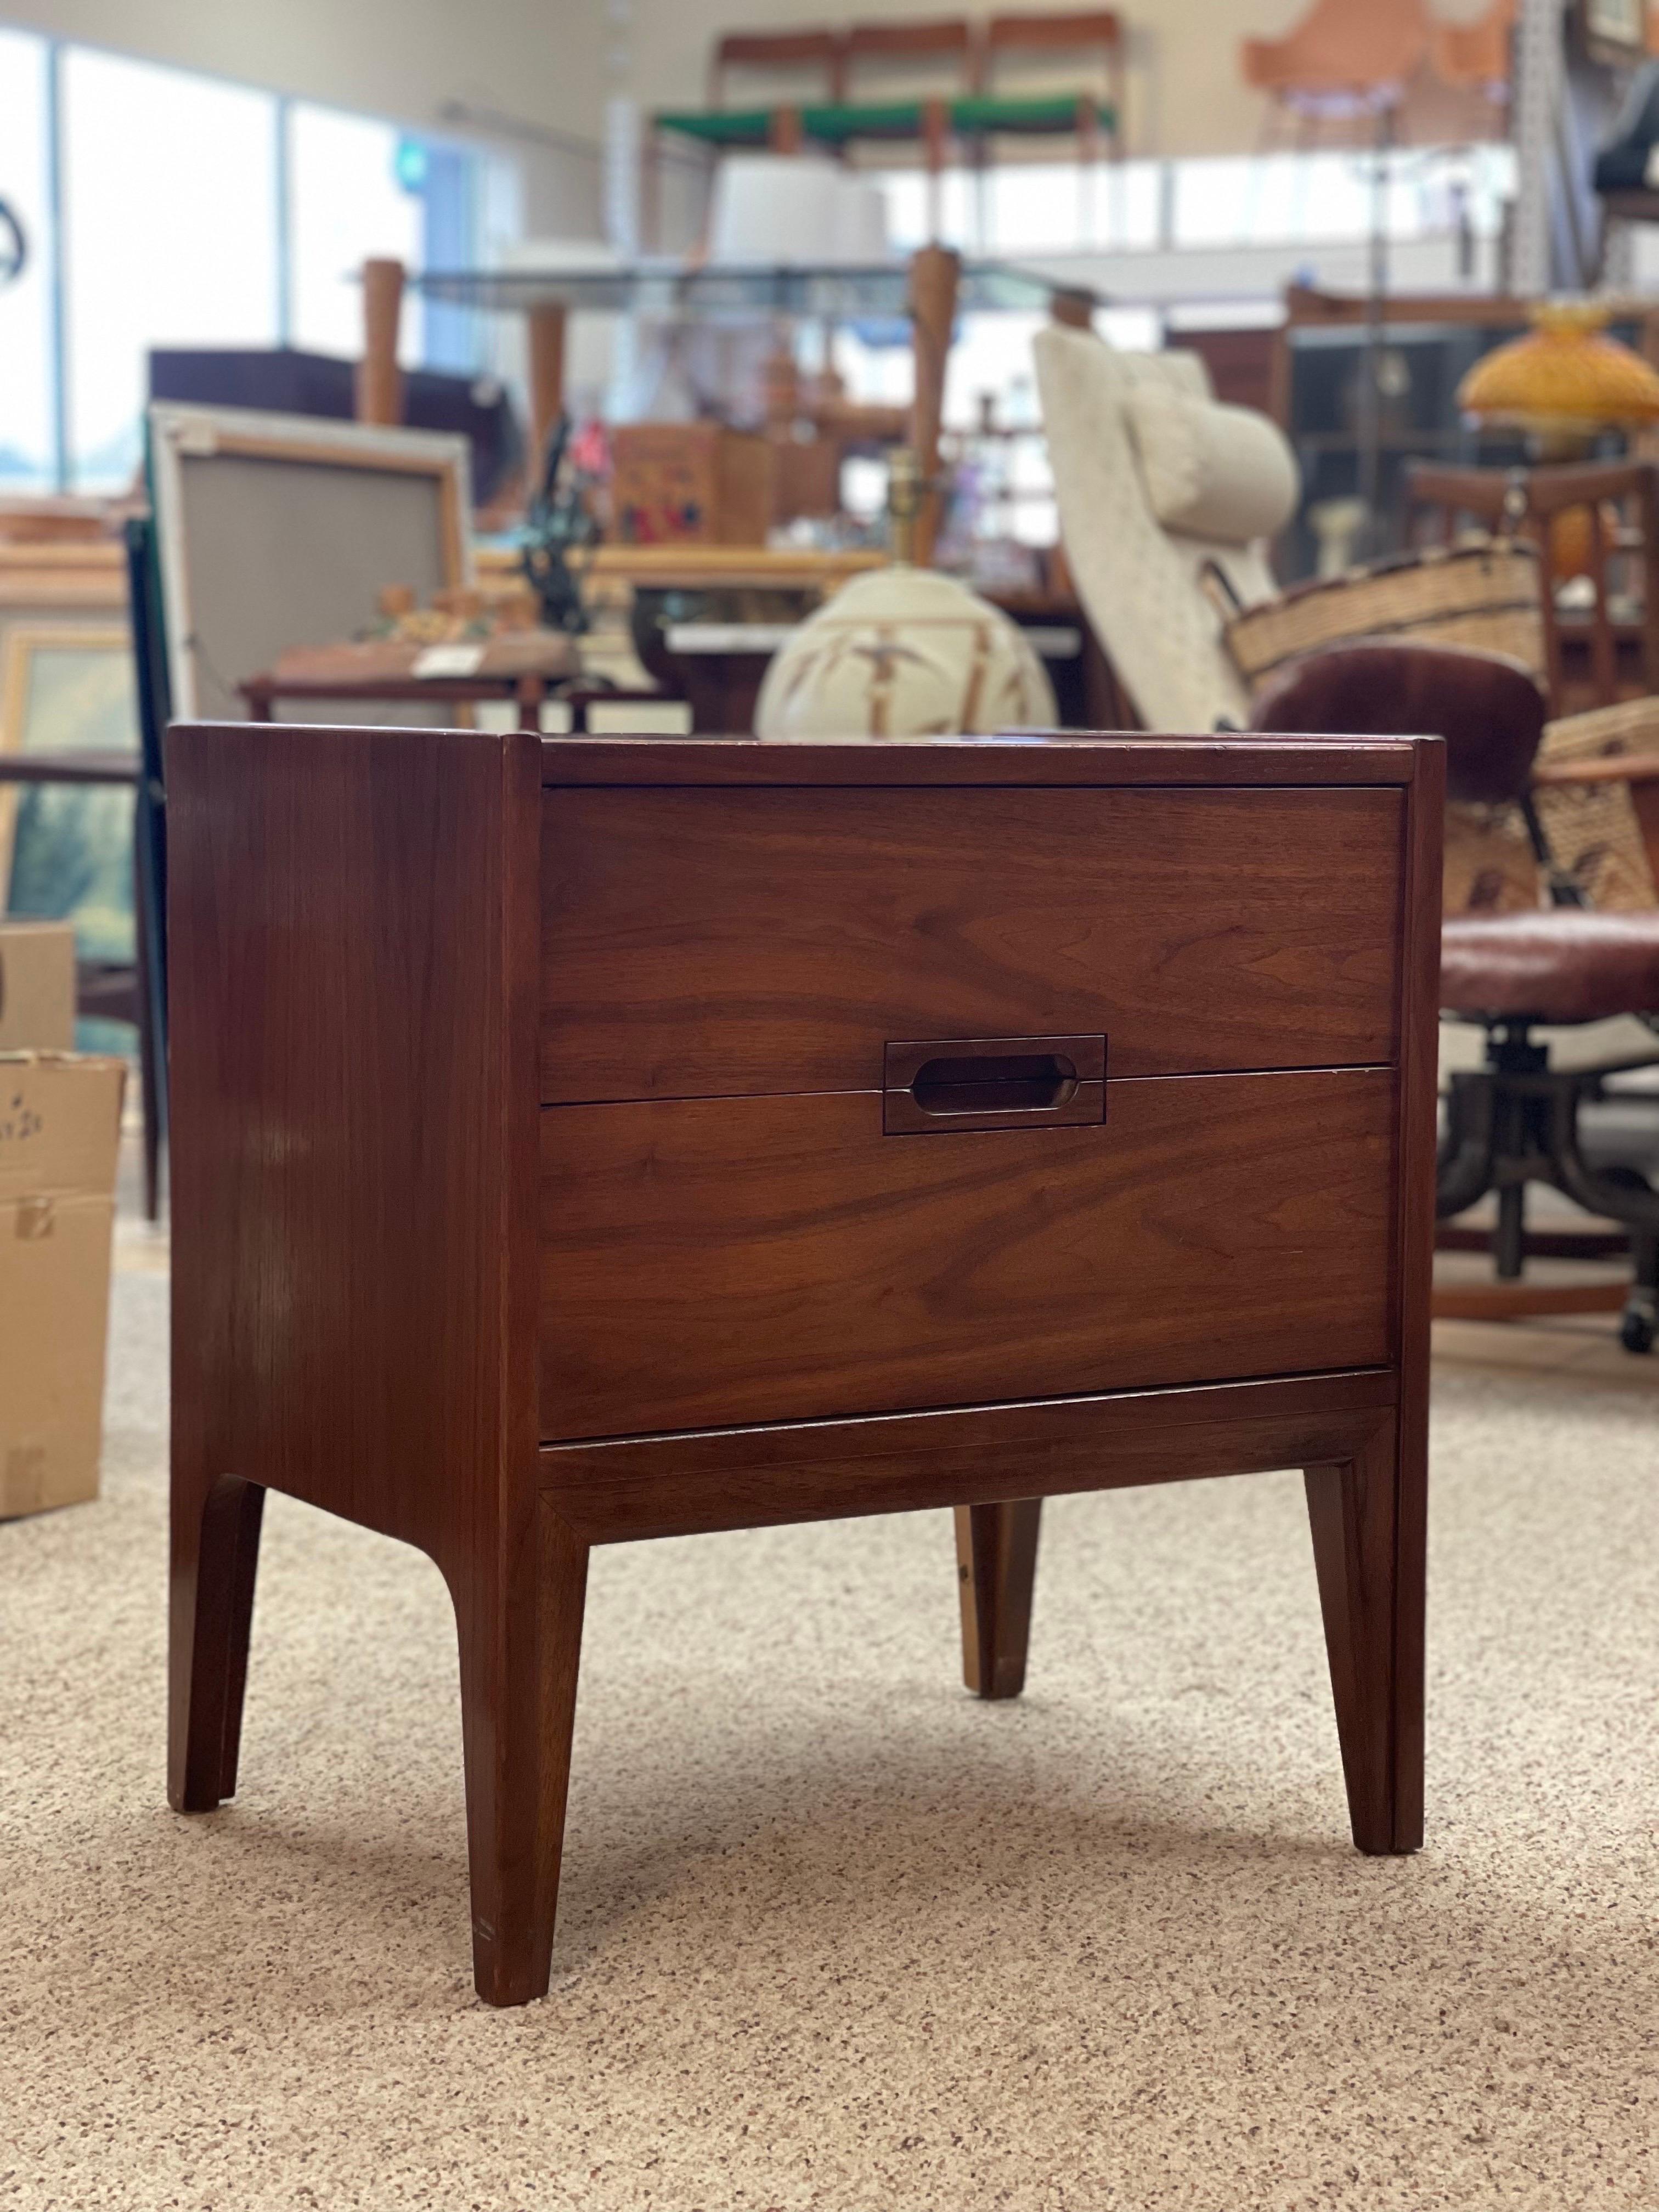 Wood Vintage Mid-Century Modern Accent Tables Dovetail Drawers For Sale